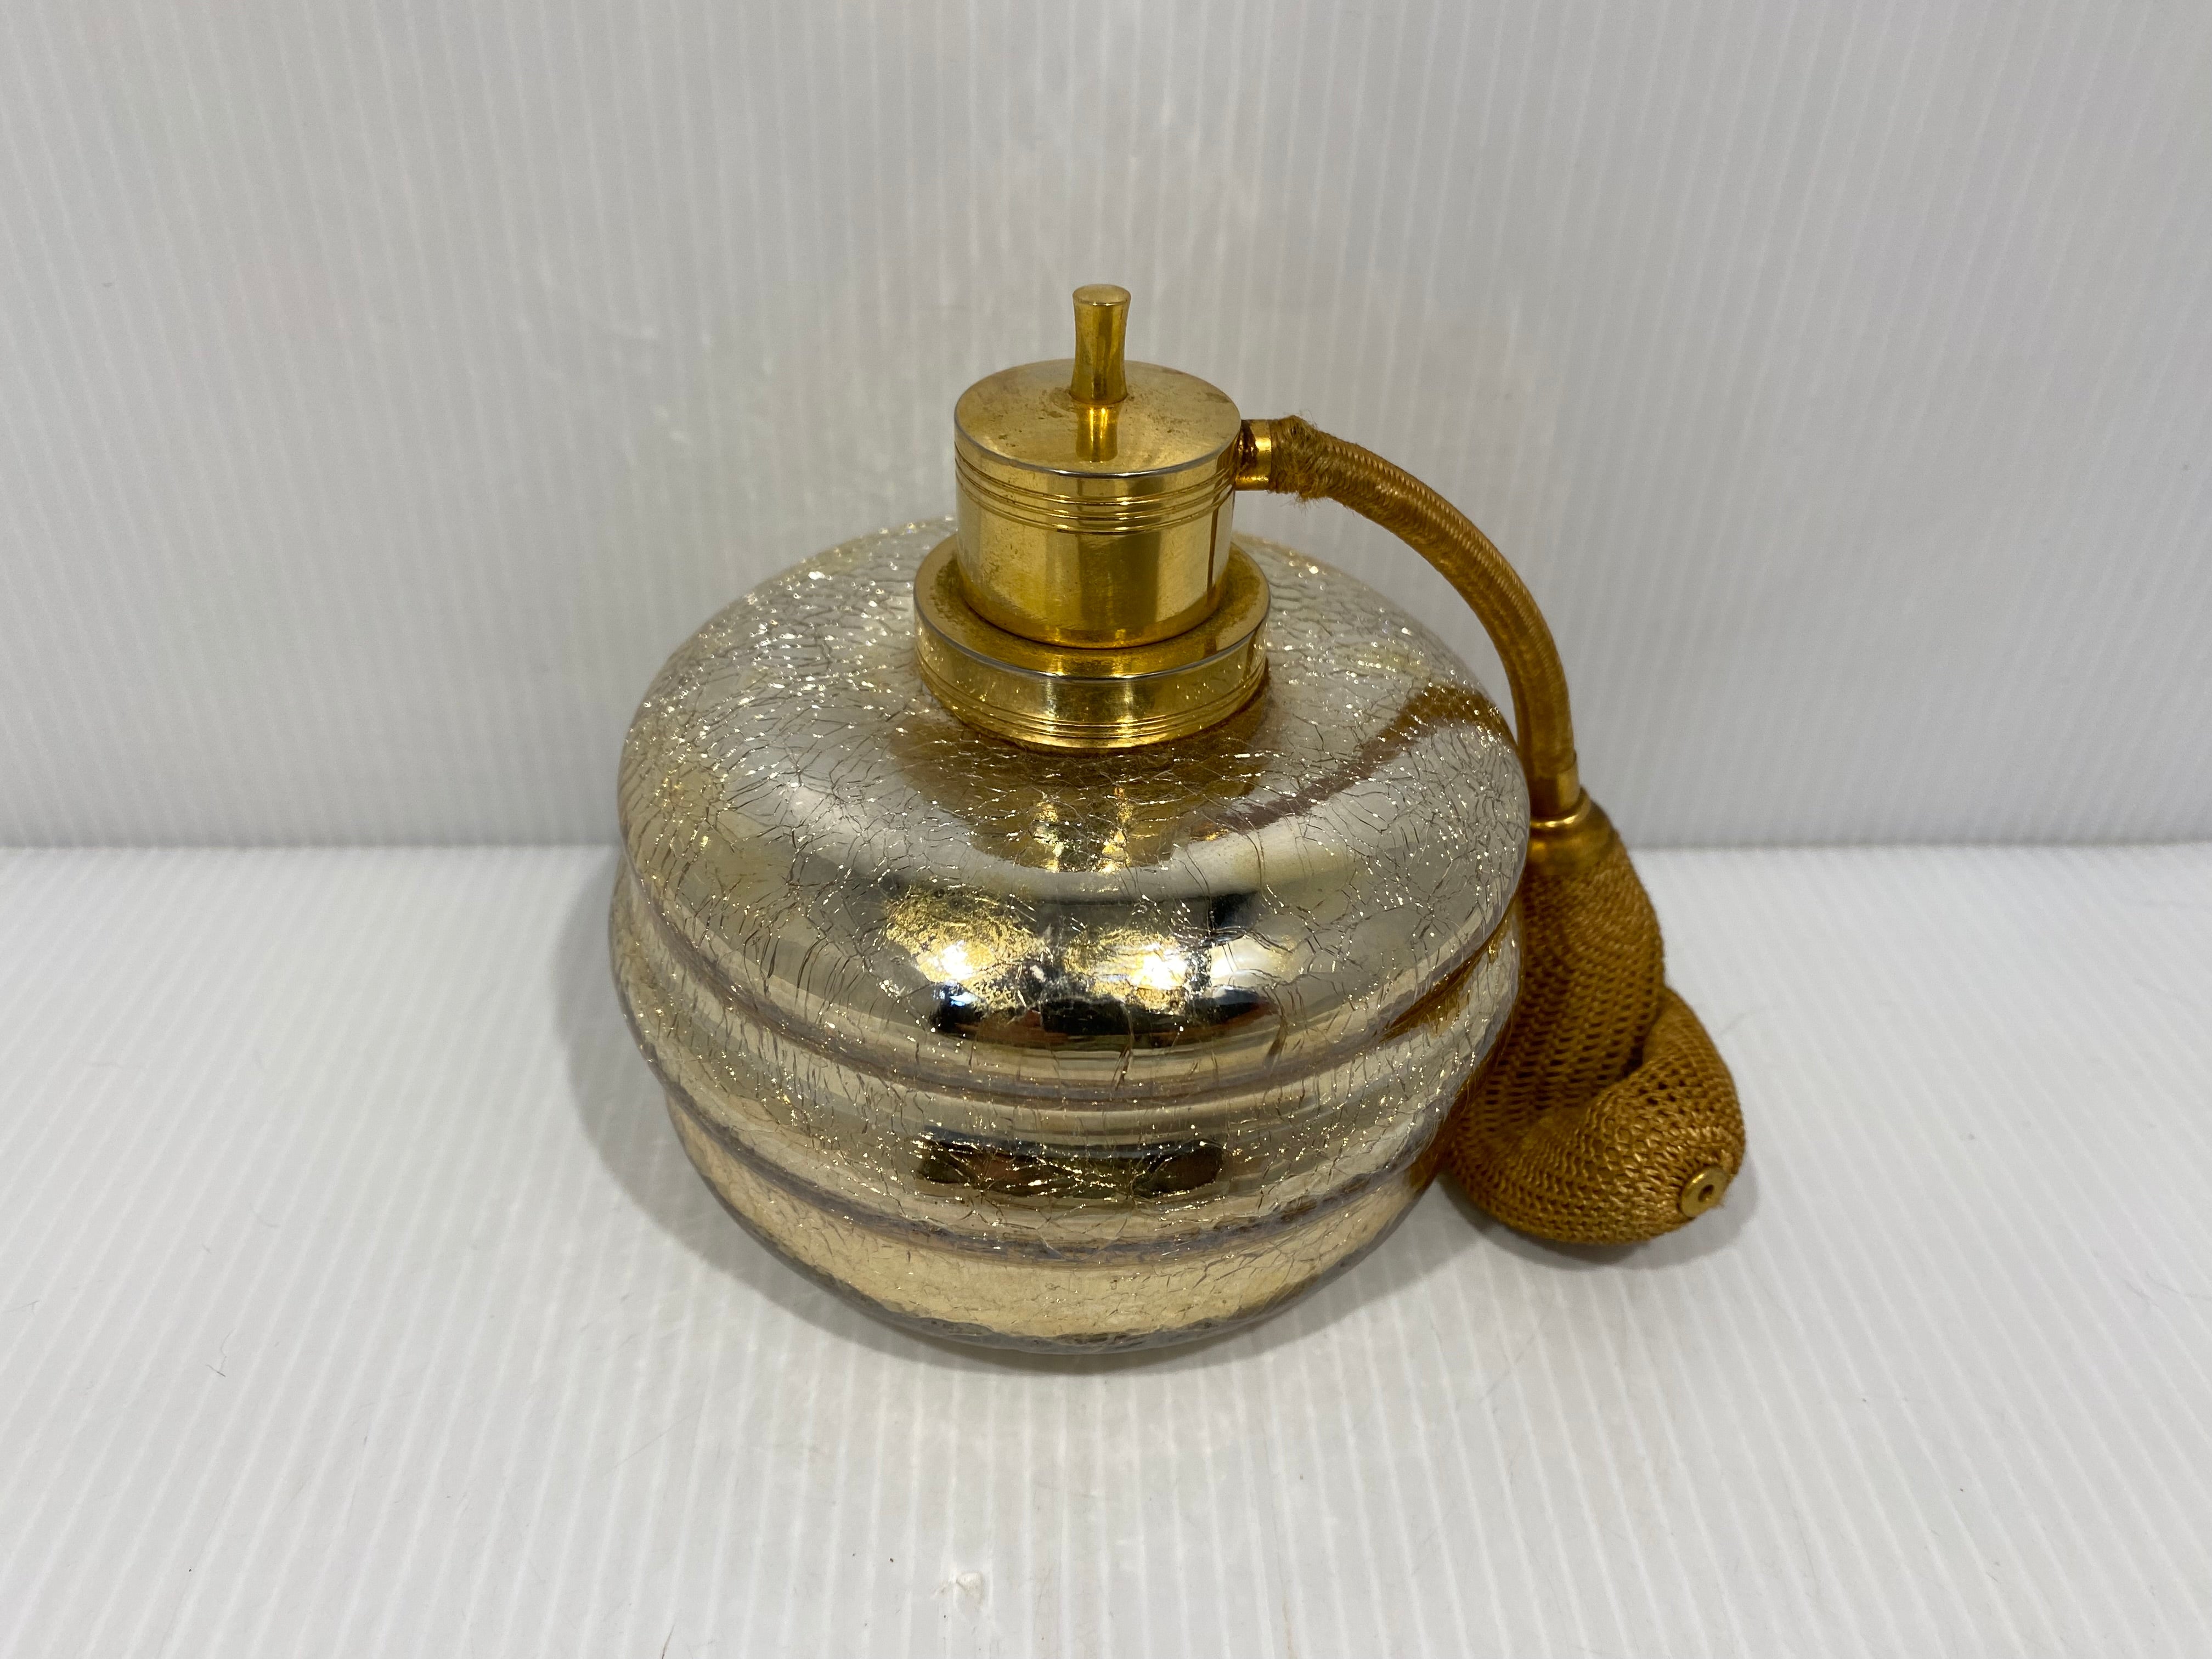 wonderful vintage DeVilbiss perfume atomizer from the 1930s.